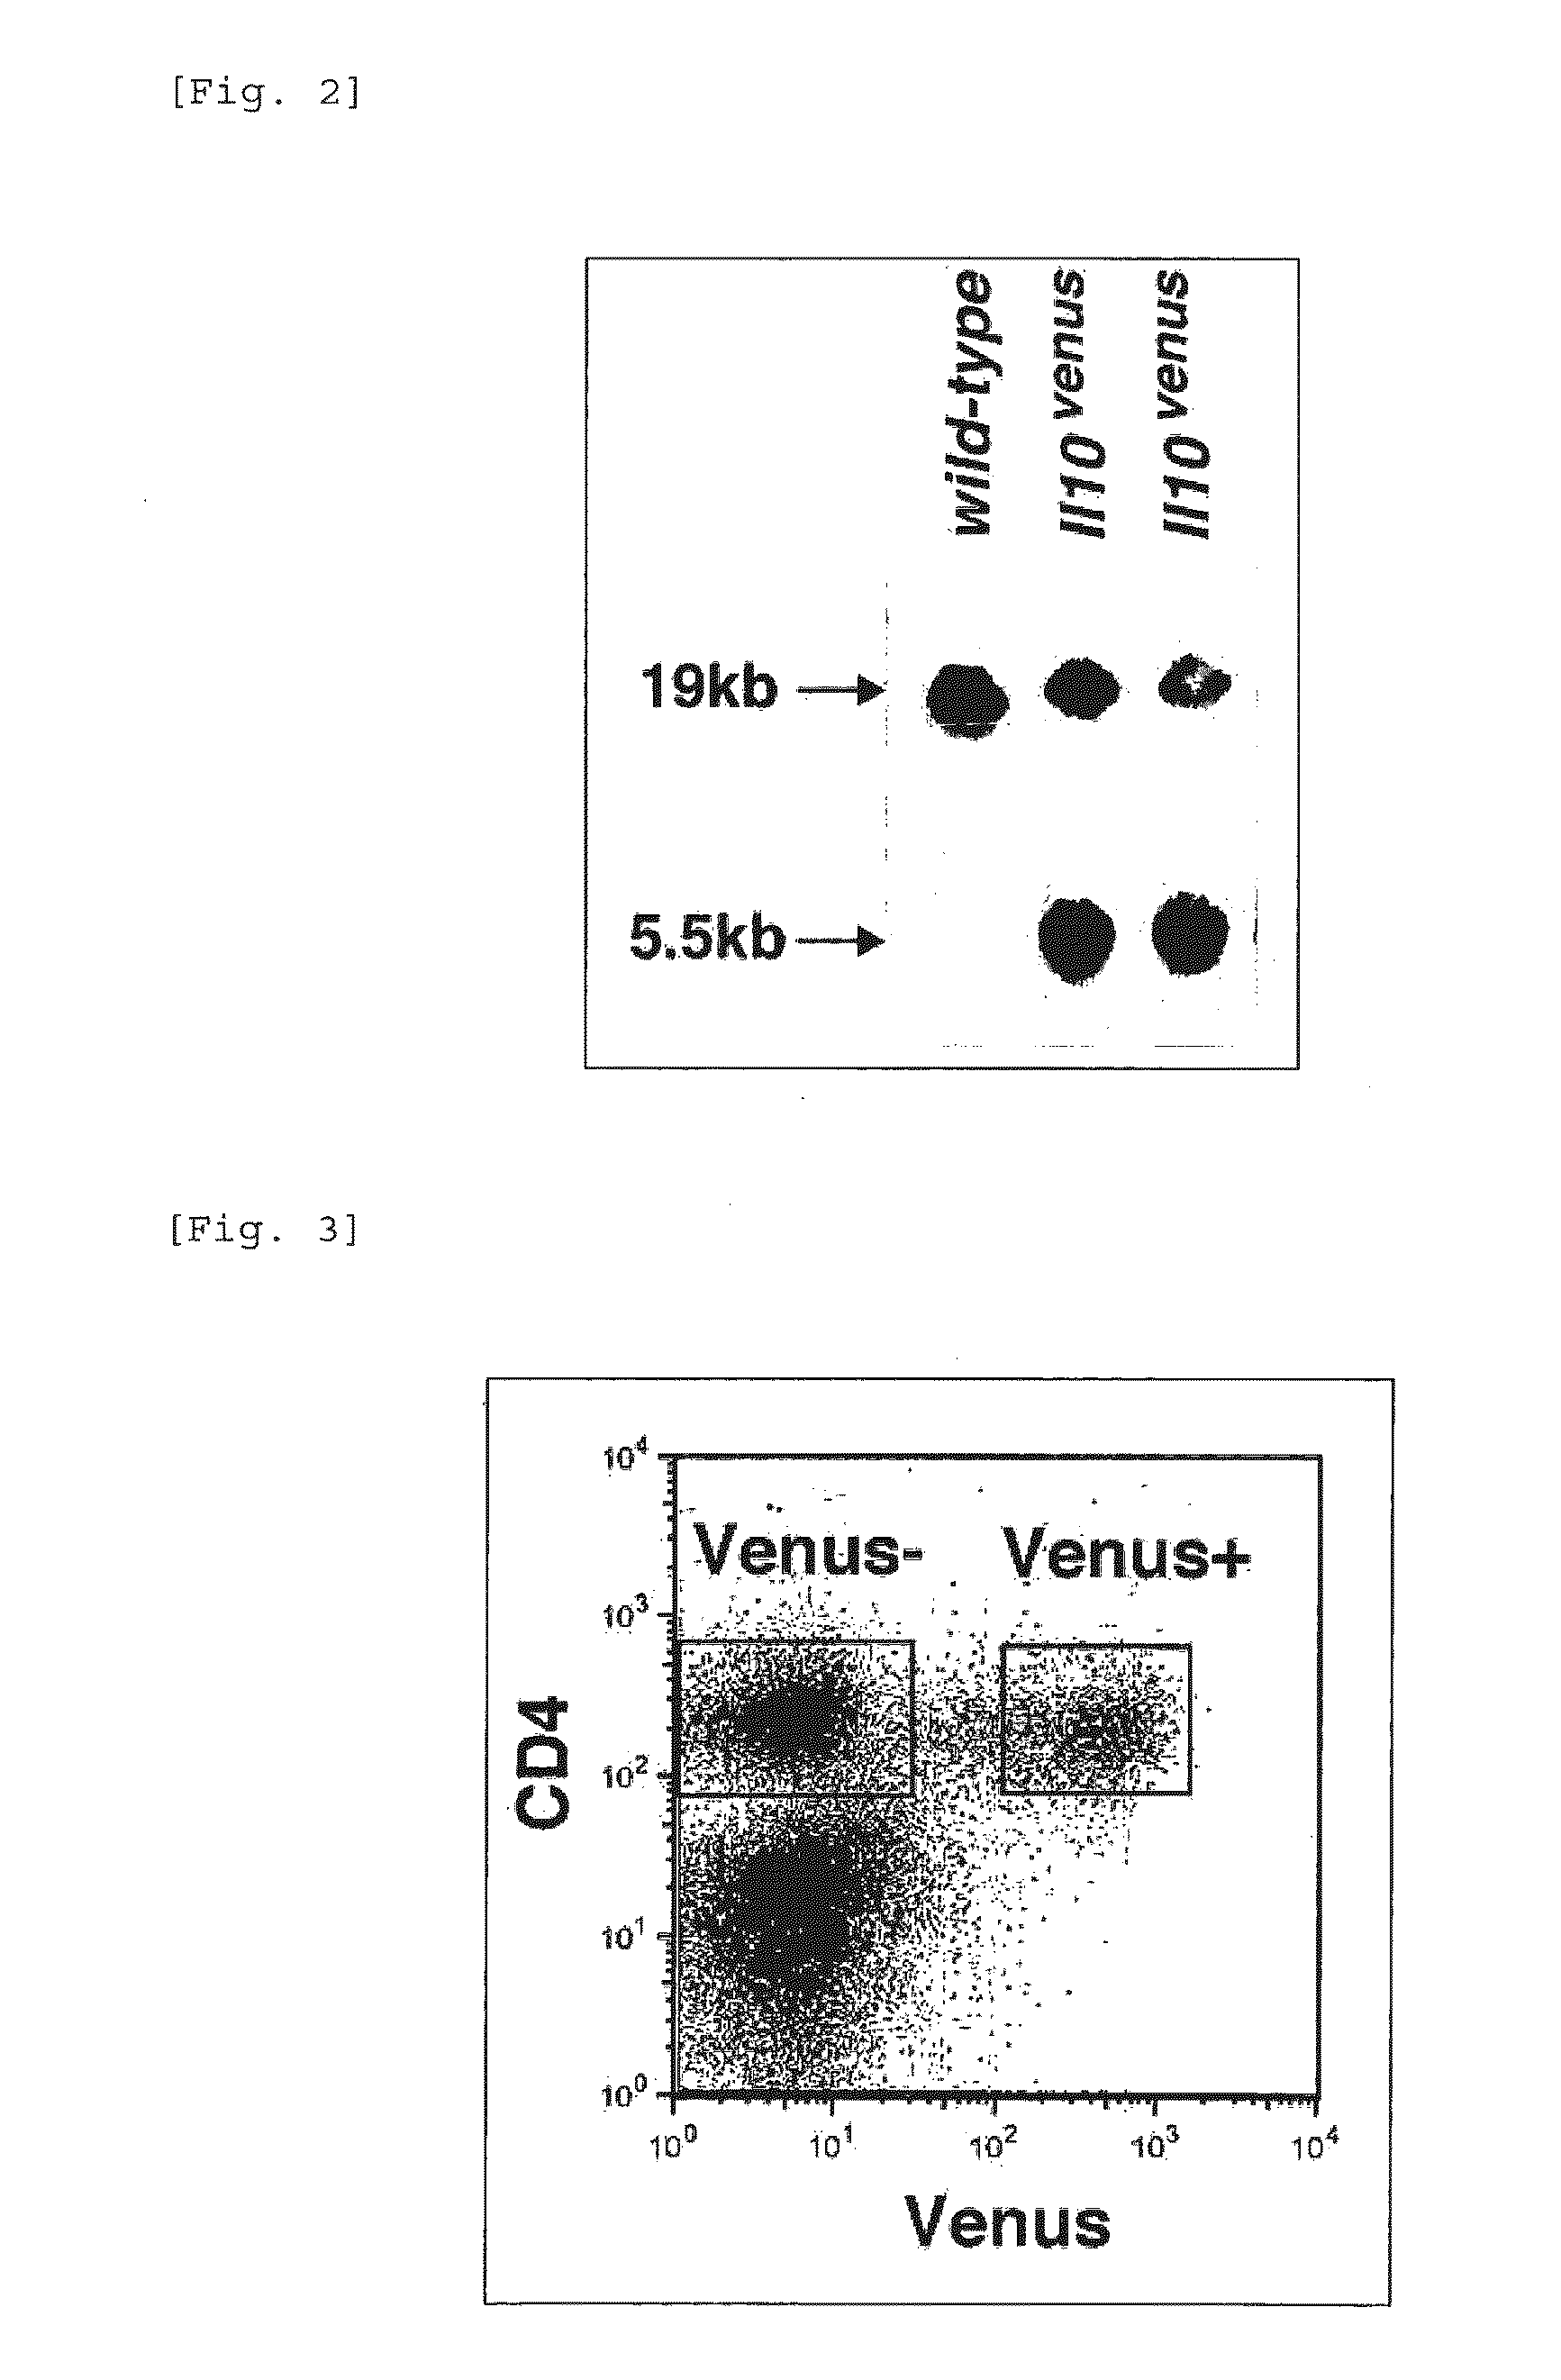 Composition for inducing proliferation or accumulation of regulatory t cells